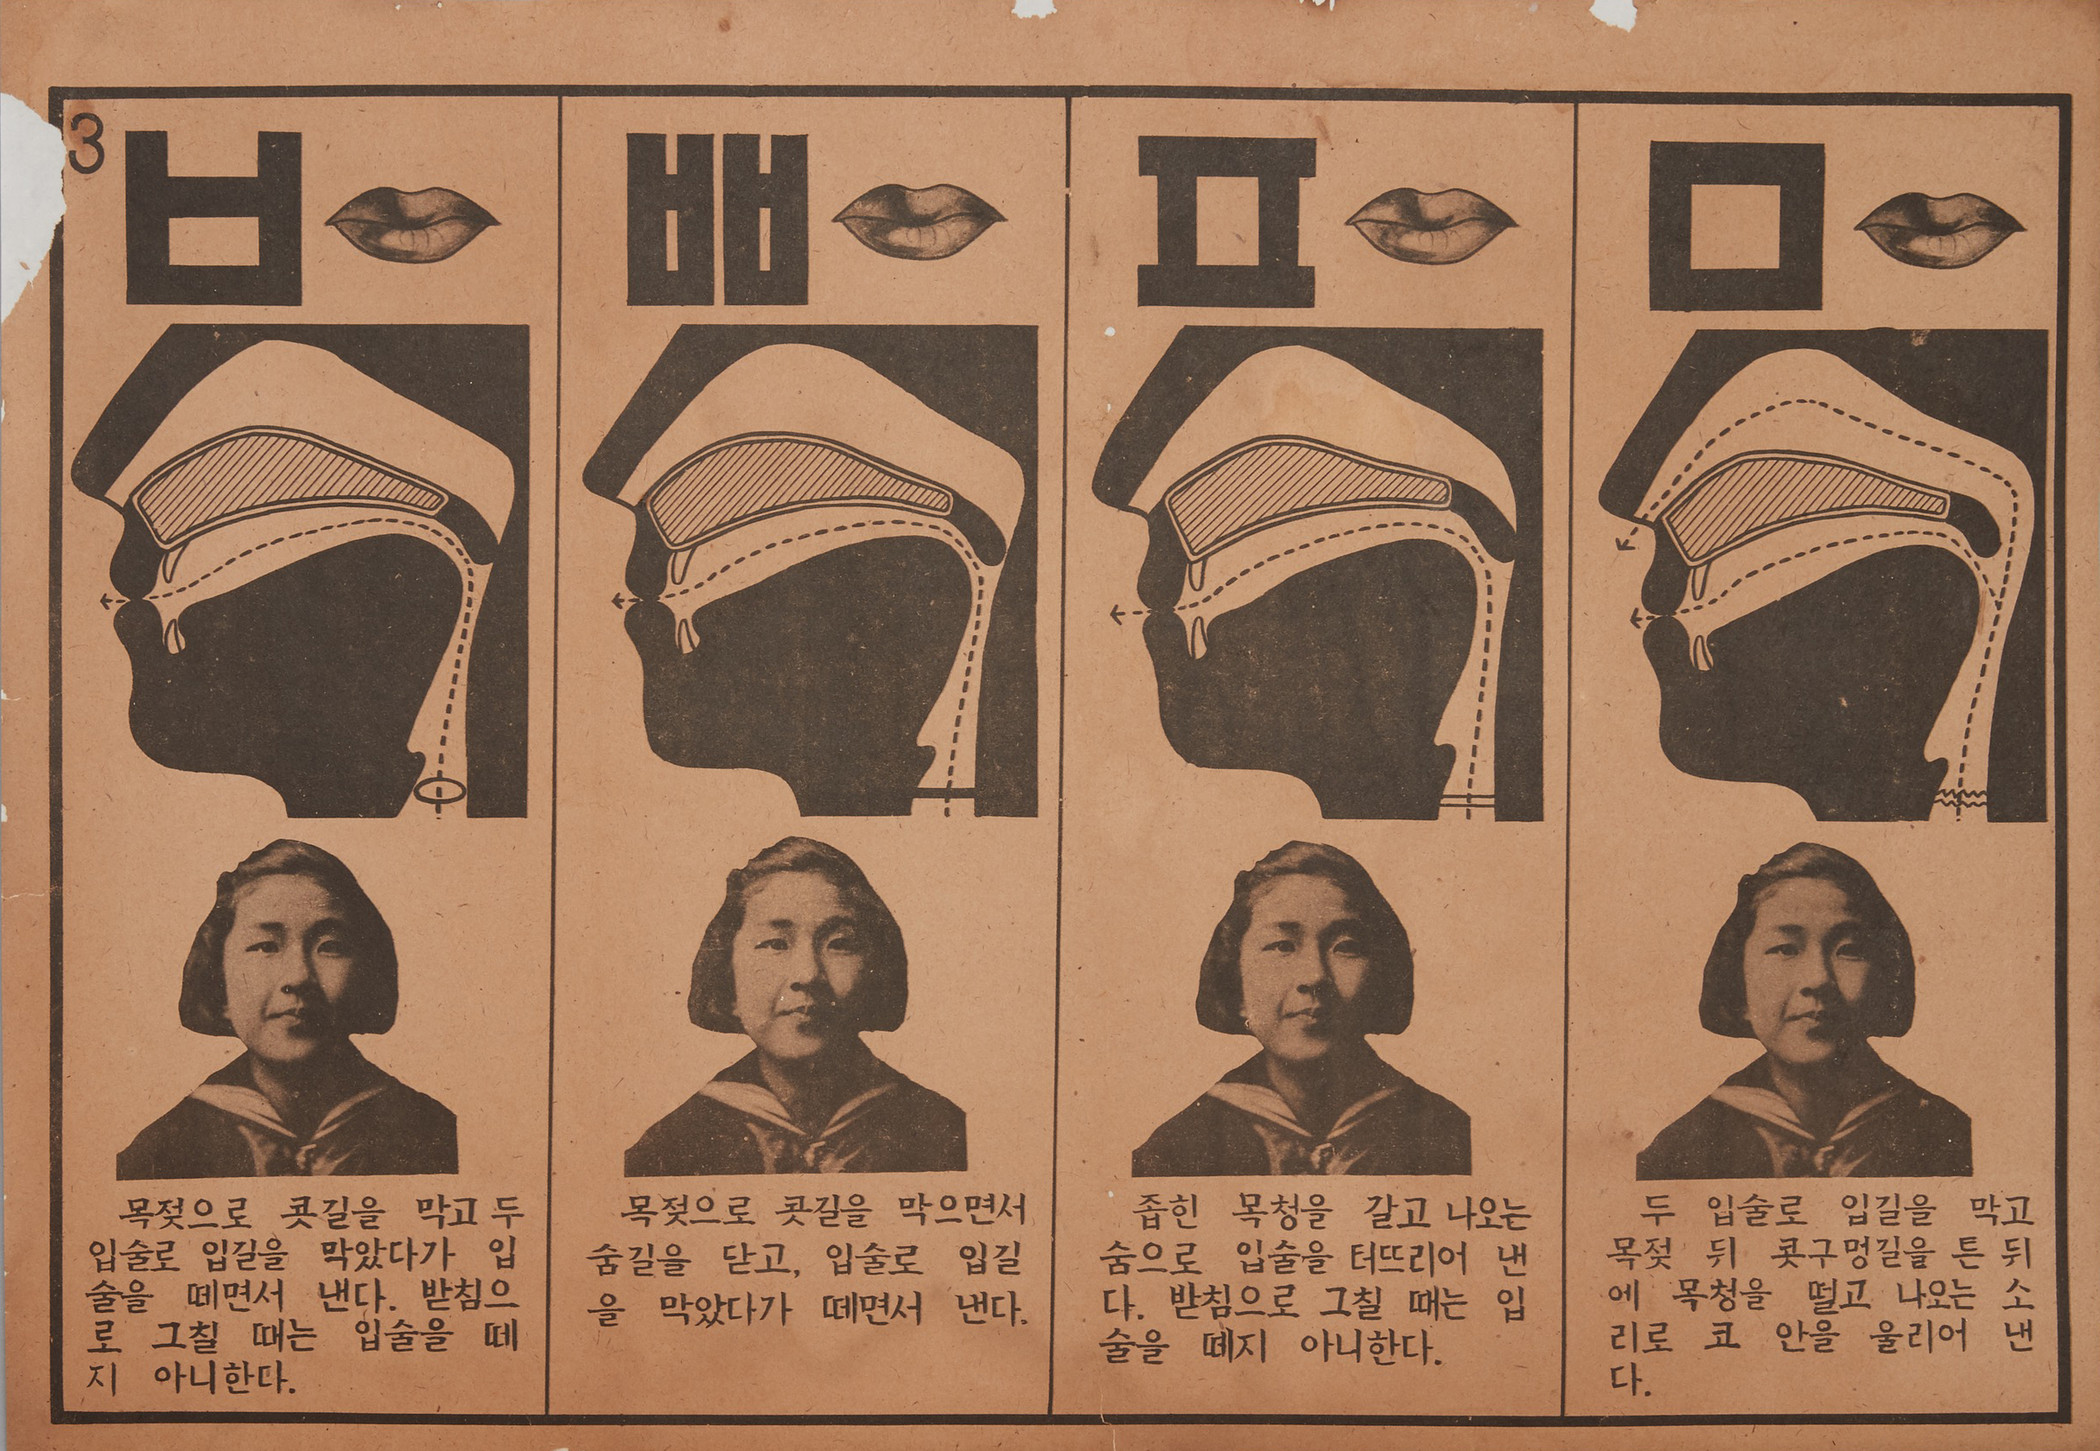 Yu Yeol and Jeong Inseung, Card with Diagram of Hangeul Mouth Movements, 1947, National Hangeul Museum, photo courtesy of National Hangeul Museum